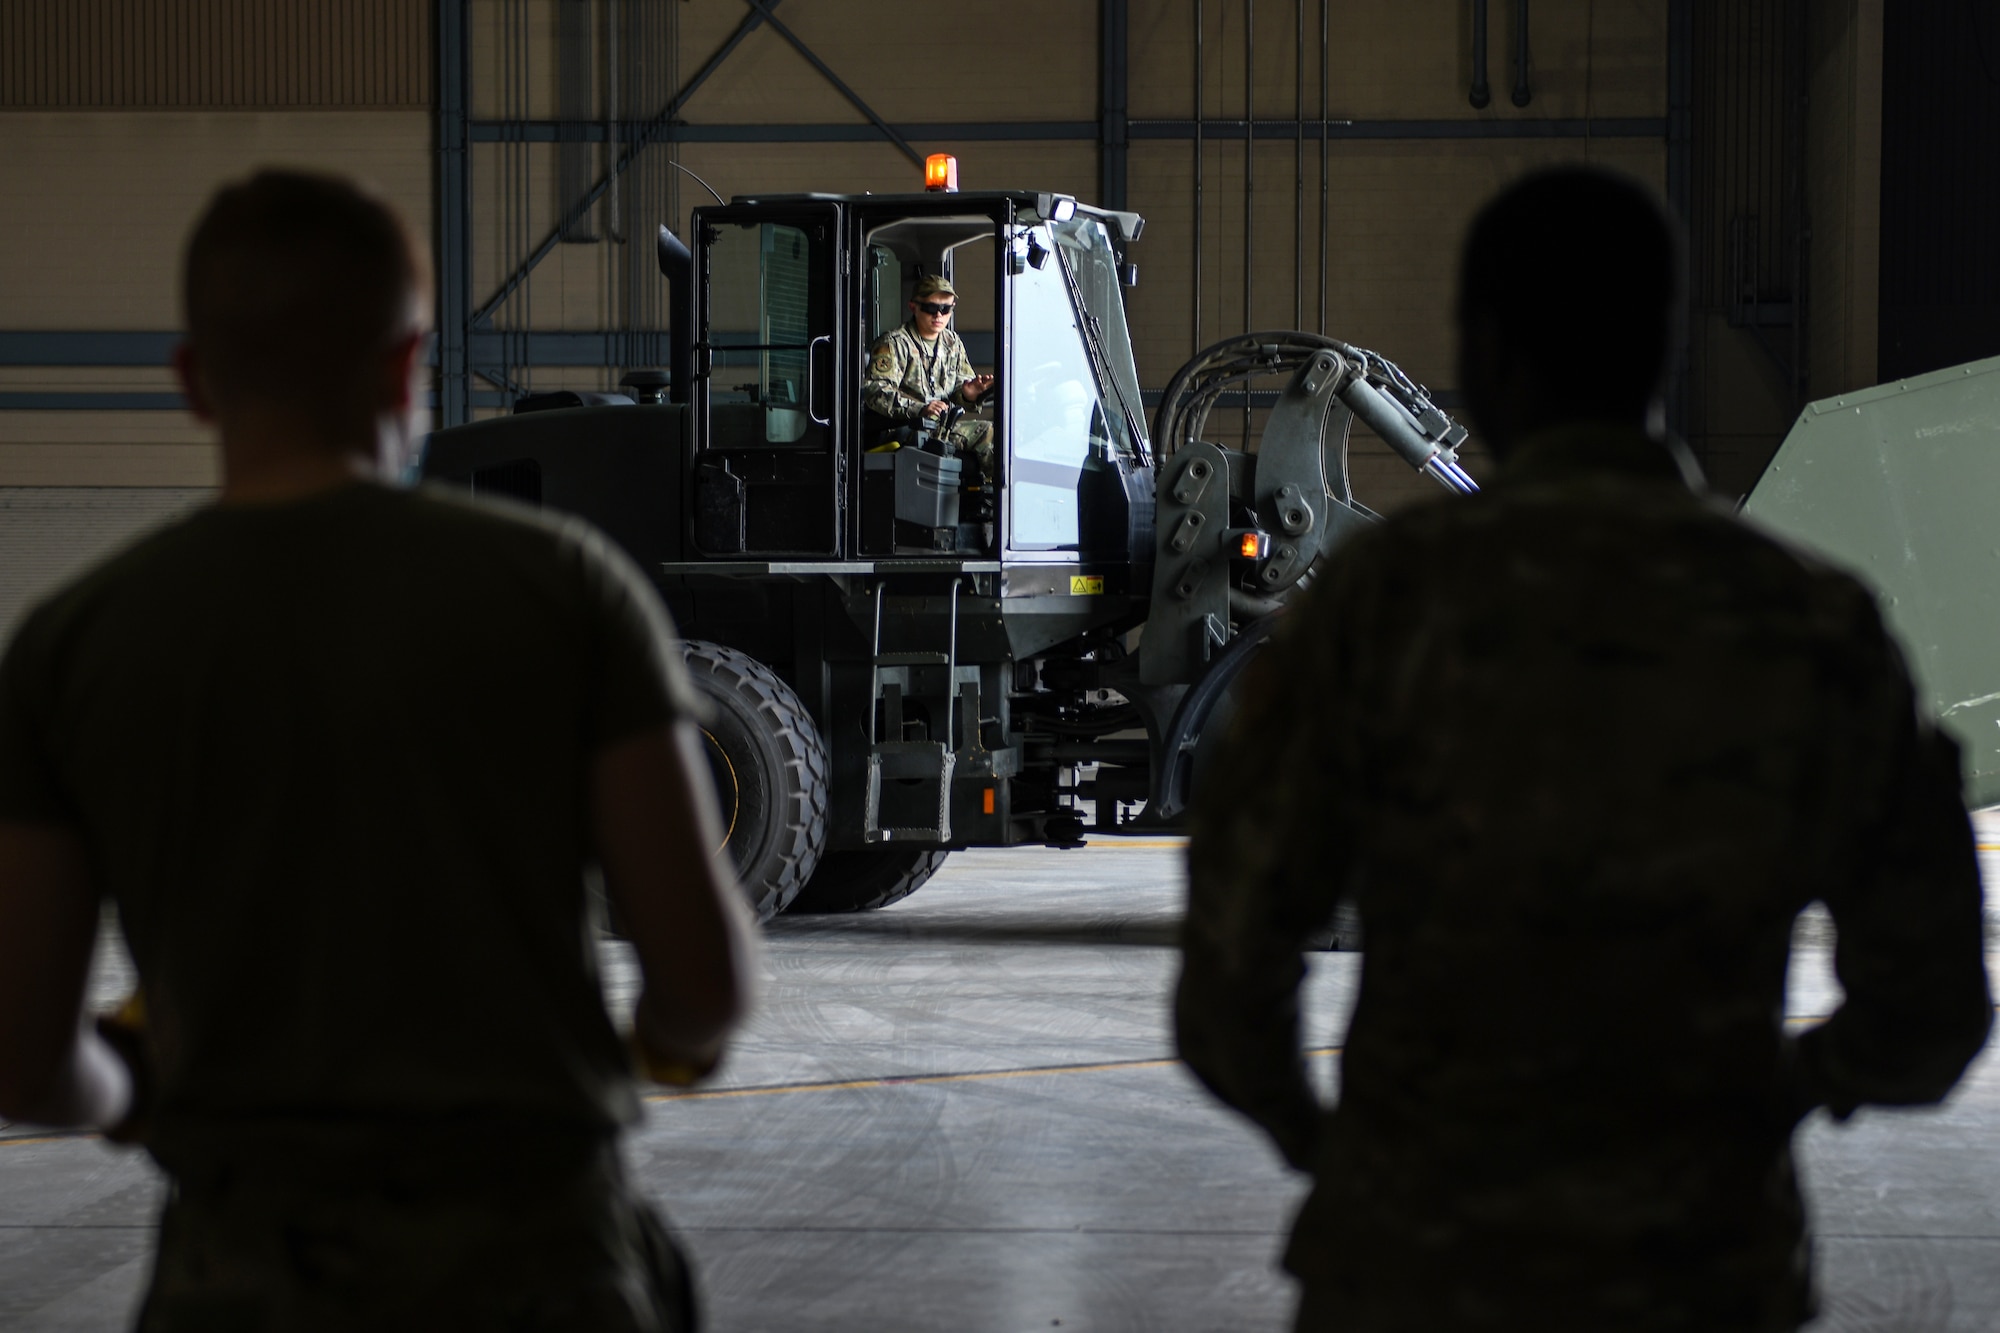 Airmen from the 319th Aircraft Maintenance Squadron watch as Staff Sgt. Thomas Anastasia, 319th Logistic Readiness Squadron vehicle operator, as he drives a forklift carrying equipment used during an exercise on Grand Forks Air Force Base, N.D., Aug. 18, 2021. A total of 768 items were transported throughout the exercise weighing in at approximately 153,884 pounds. (U.S. Air Force photo by Airman 1st Class Ashley Richards)